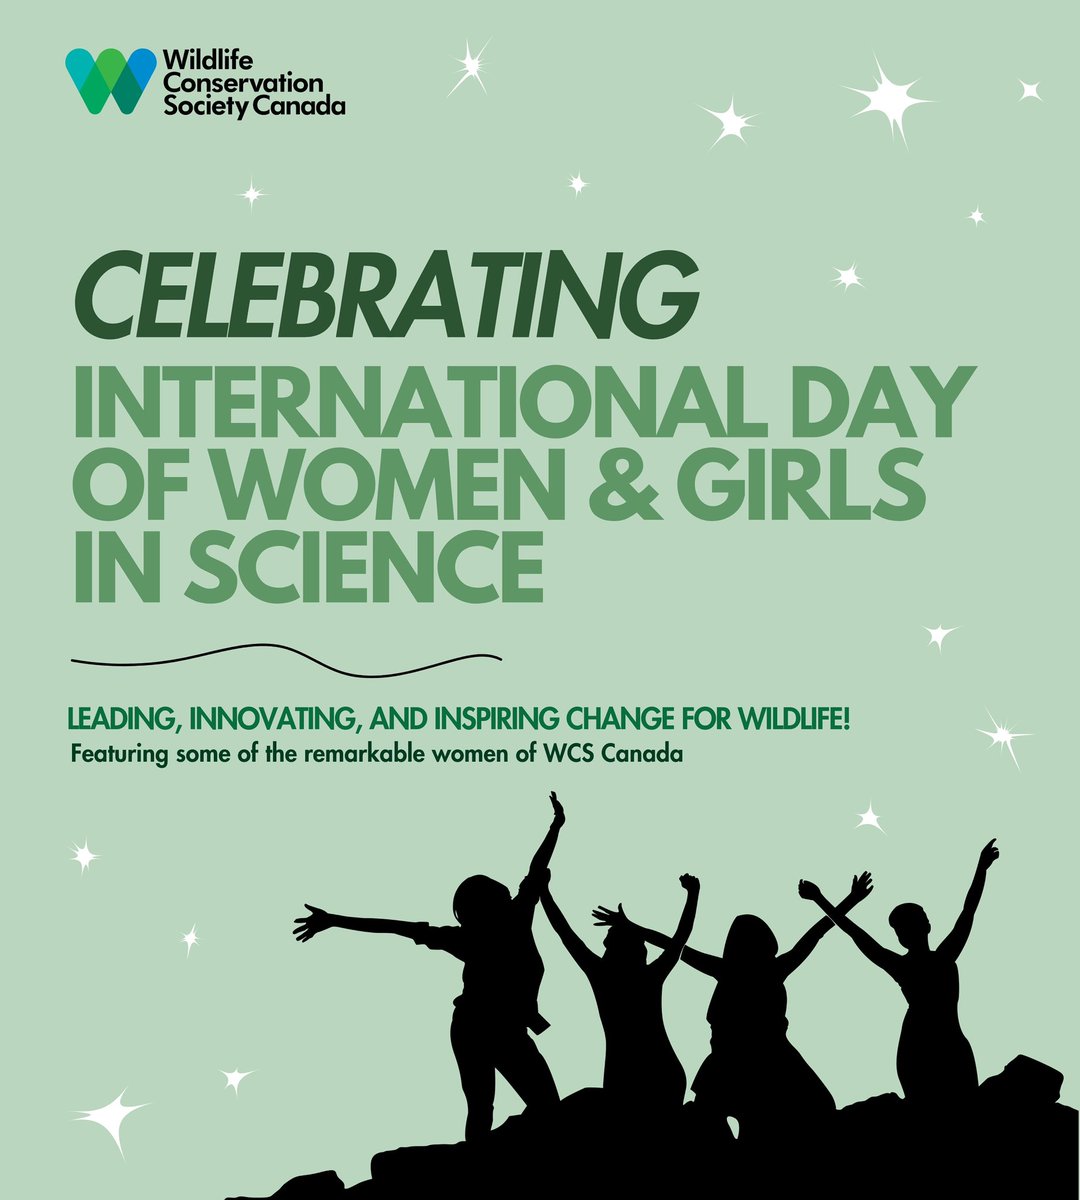 Today, on International Day of Women and Girls in Science, WCS Canada proudly celebrates the remarkable contributions and achievements of our inspiring female scientists. Meet some of the remarkable women of WCS Canada ✨ #WomenInScience #GirlsInScience #EmpoweringChange